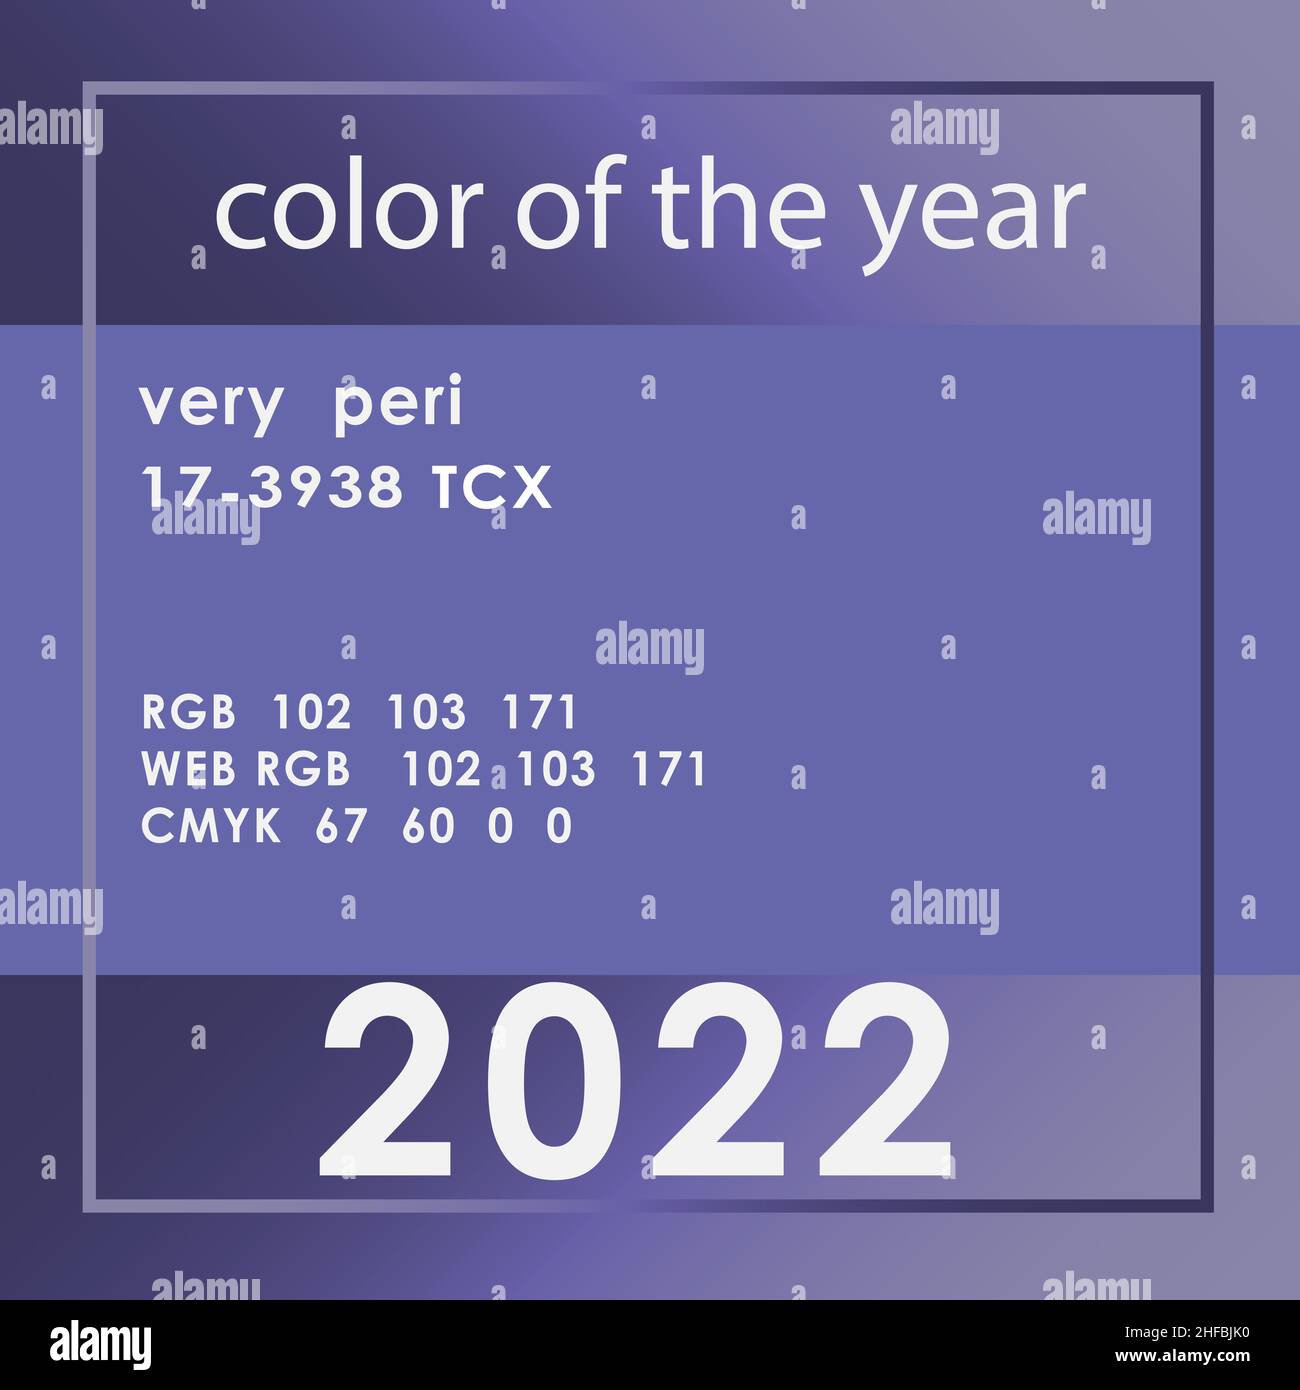 the color of the year 2022 according to PANTONE.Very peri periwinkle blue color with purple-red tint, Stock Vector